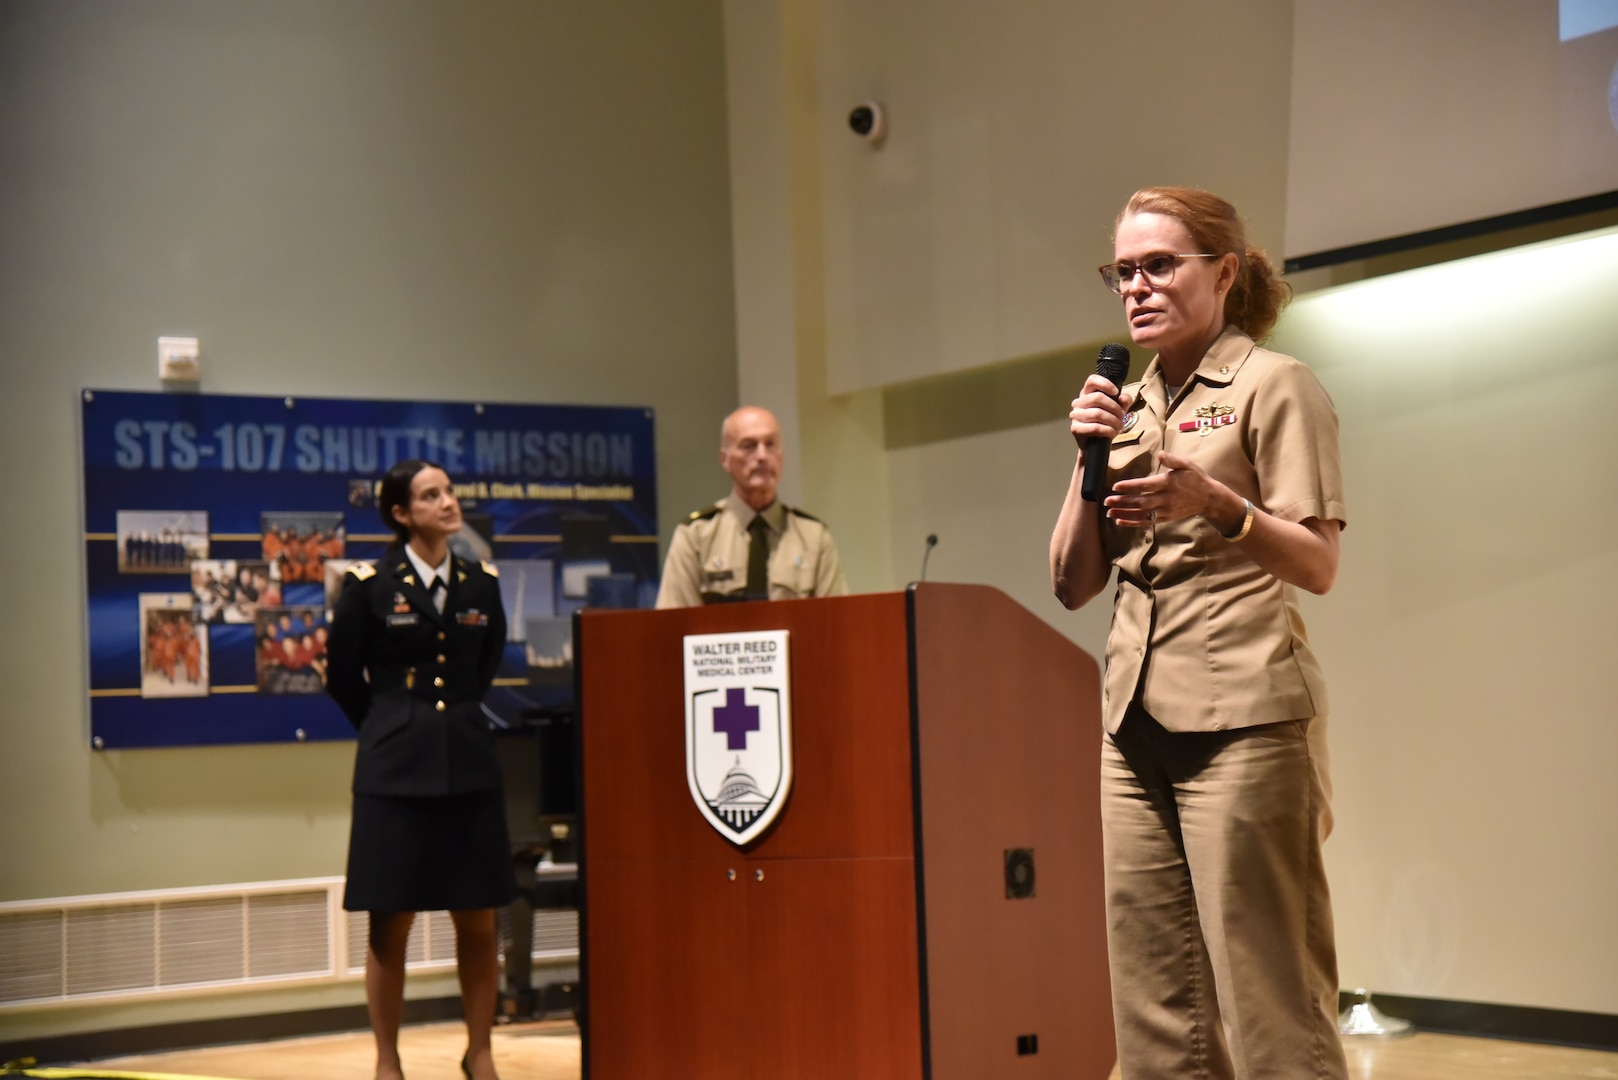 Walter Reed director U.S. Navy Capt. (Dr.) Melissa Austin (3rd from left) introduces U.S. Army Lt. Col. (Dr.) Jamie Diaz Robinson (left) and U.S. Army Chaplain (Maj.) Vincent Bain (center) during a Grand Rounds forum on May 21 in Clark Auditorium in Bethesda, Maryland.